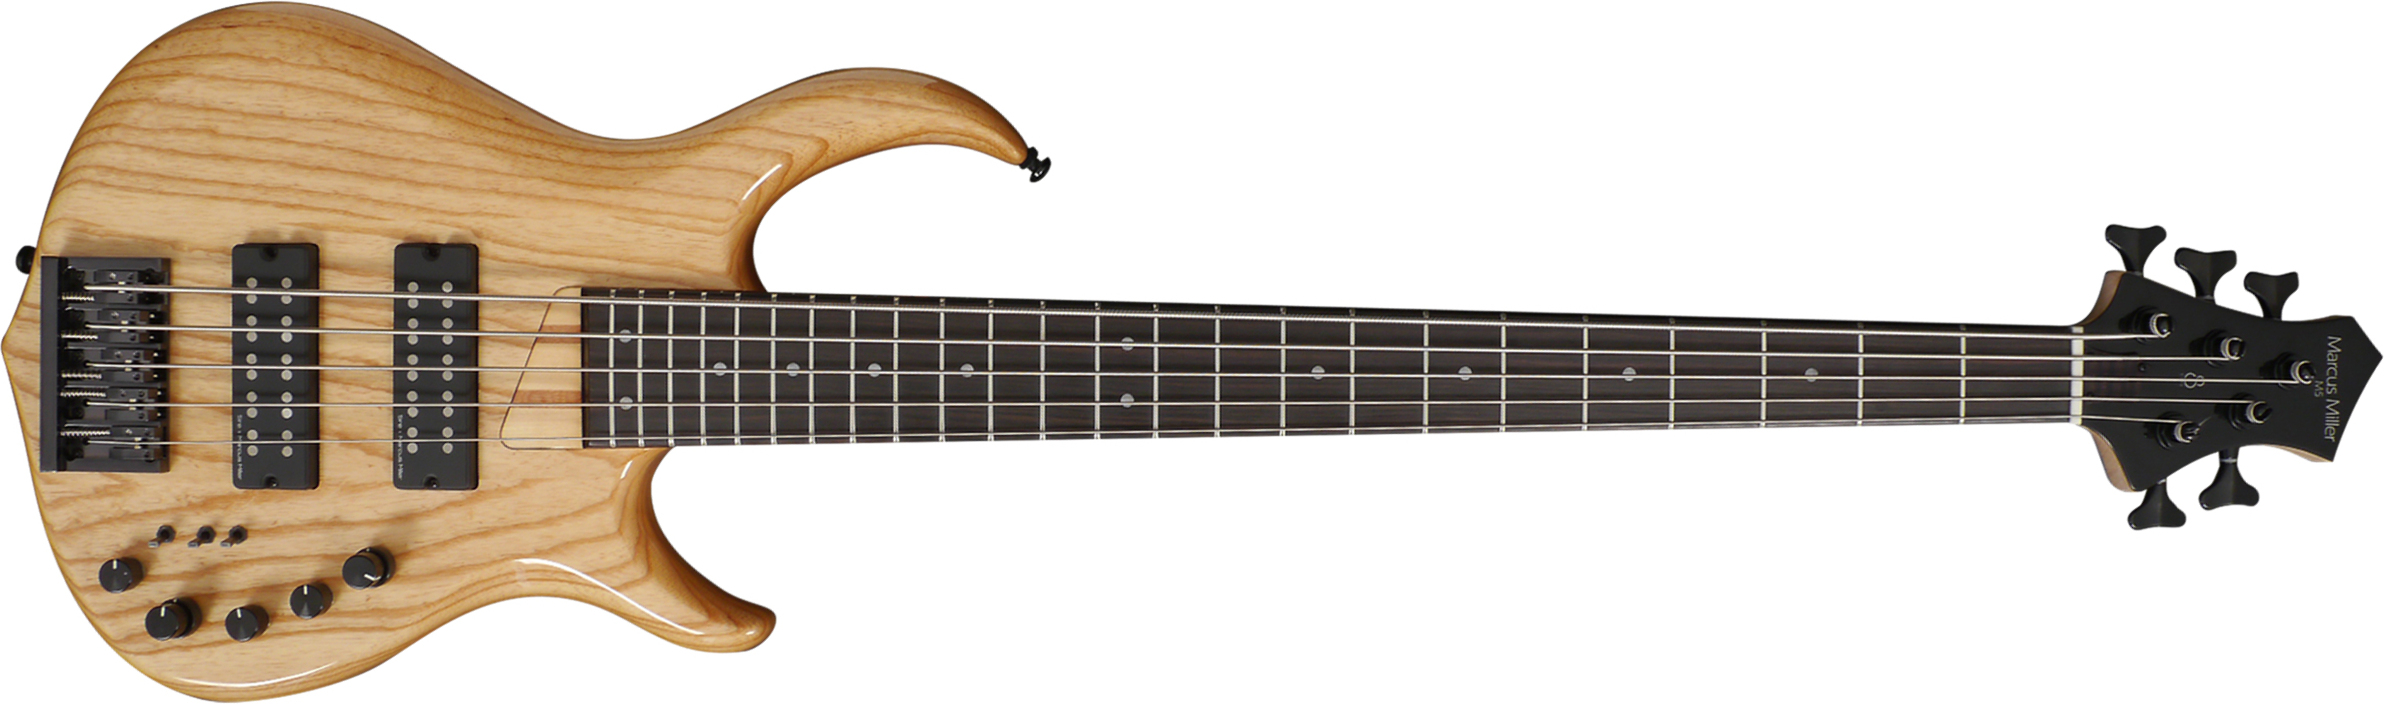 Marcus Miller M5 Swamp Ash 5st 5-cordes Active Eb - Natural - Solidbody E-bass - Main picture